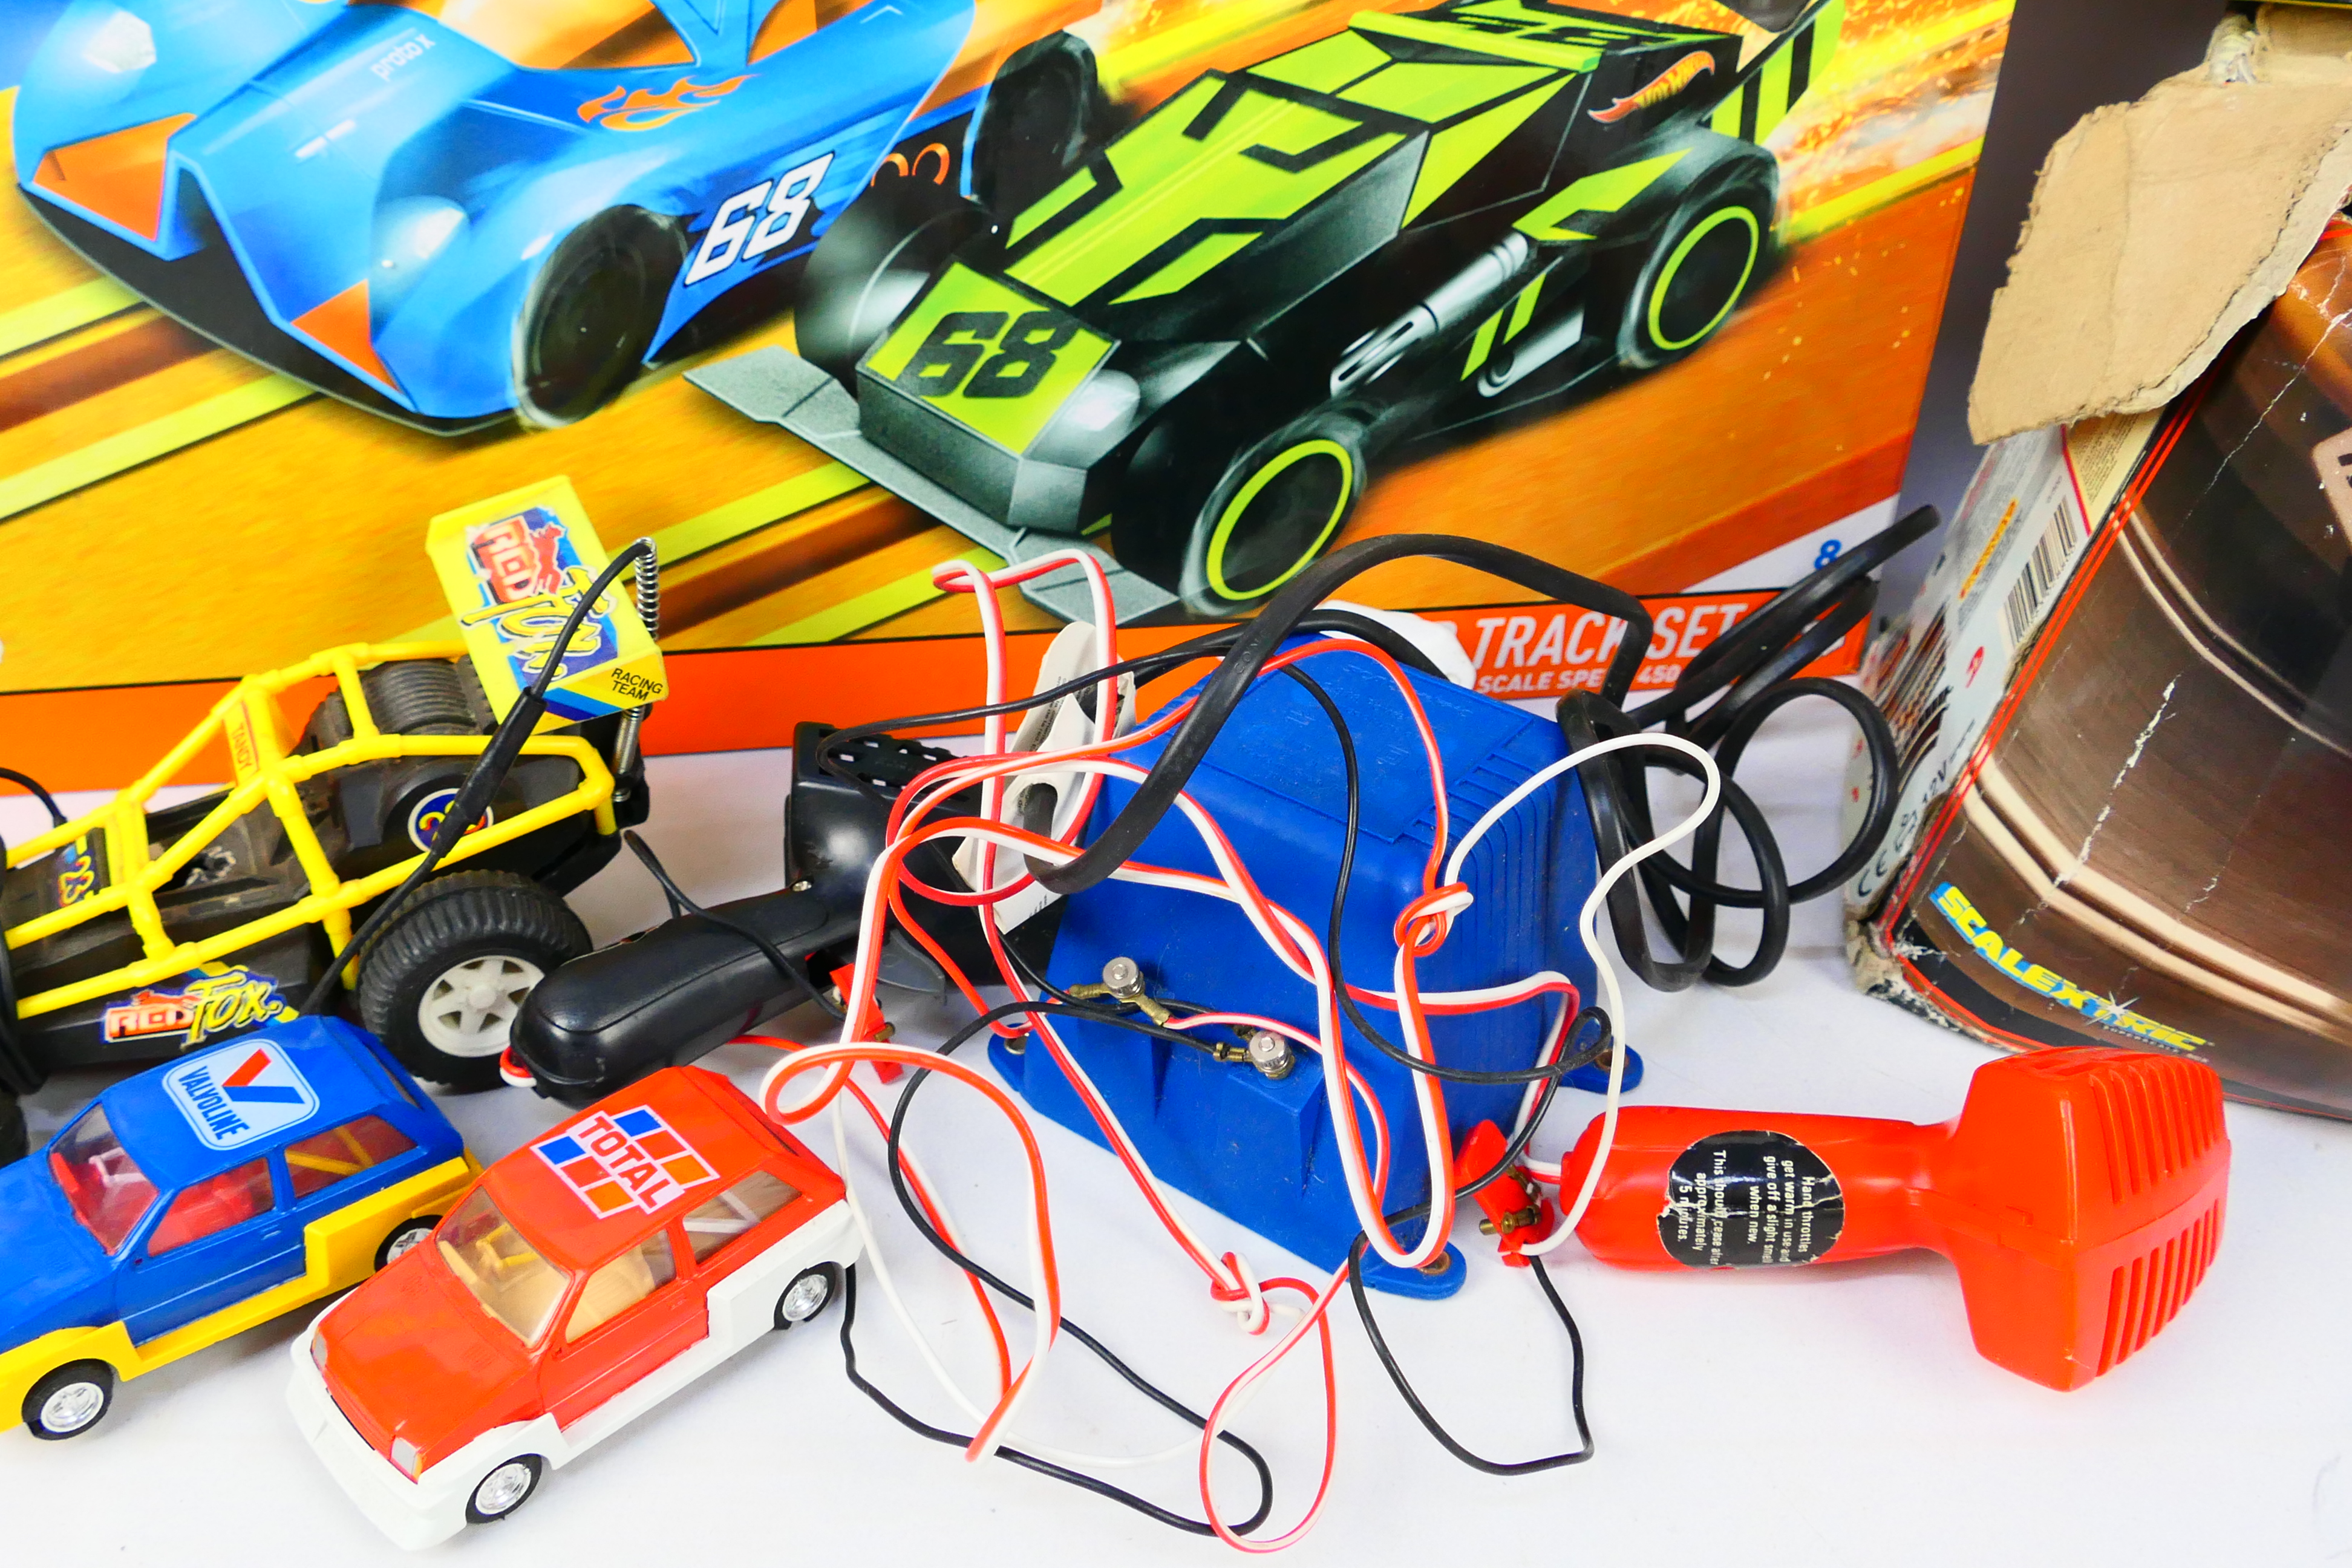 Hot Weels - Scalextric - A Hotwheels 683cm circuit Slot Car Track Set (#83131) with instruction. - Image 3 of 6